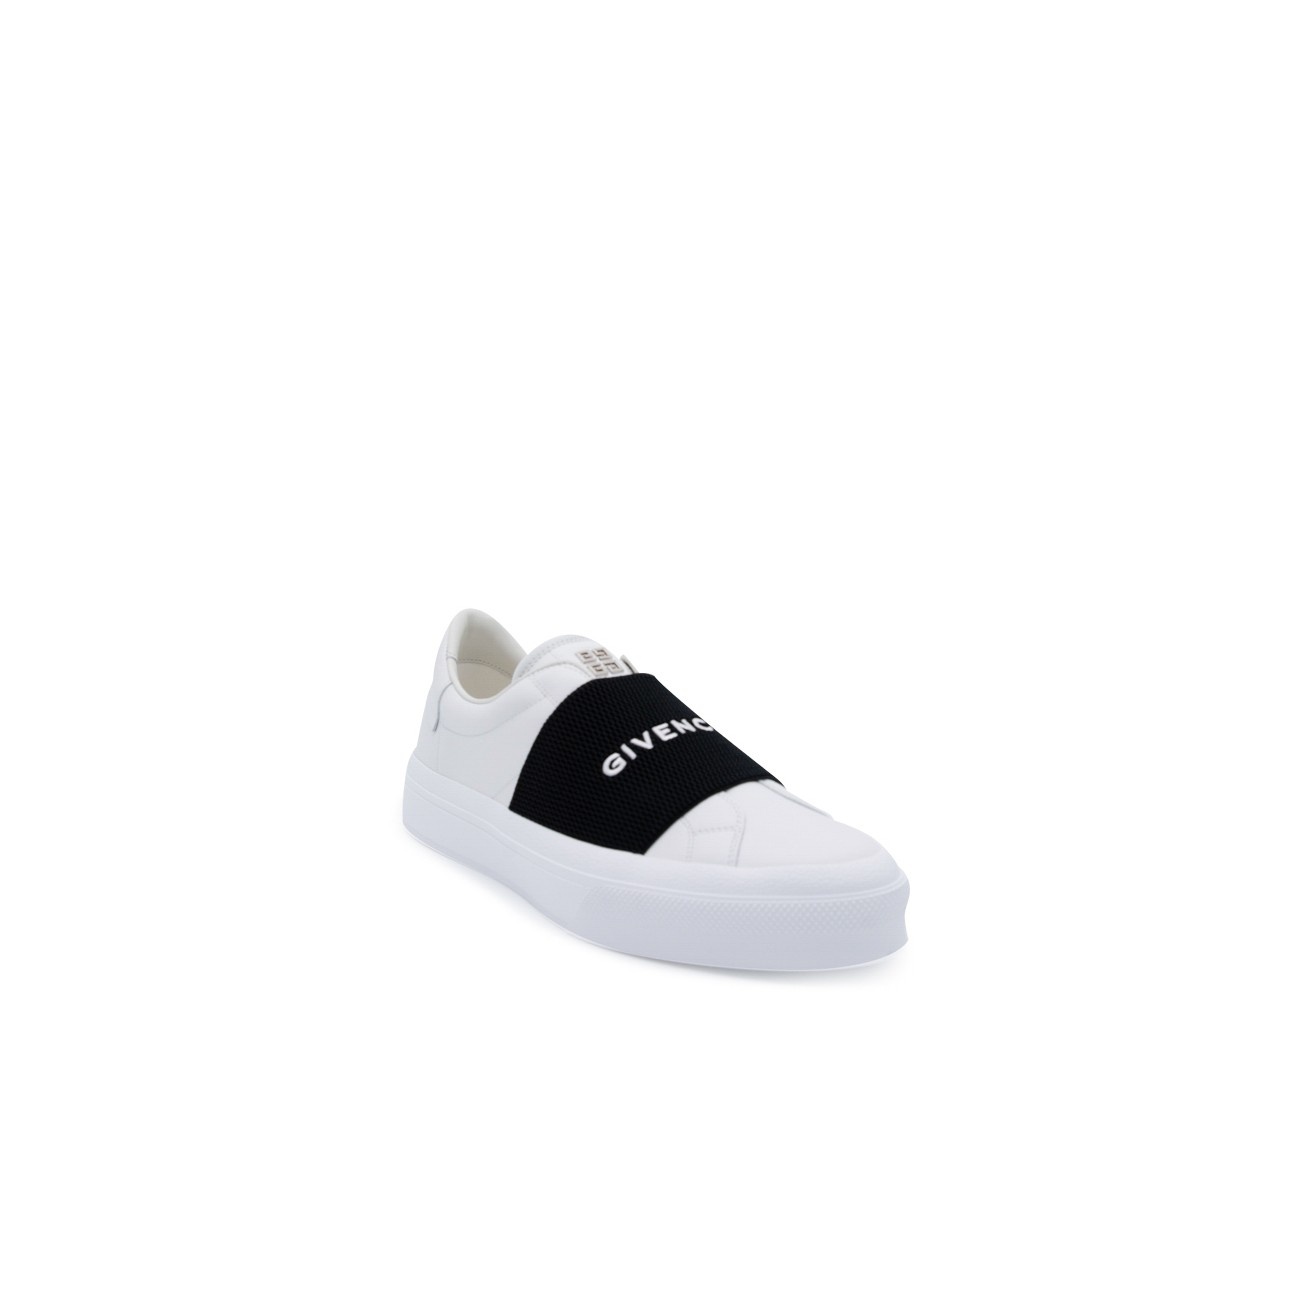 white and black leather city sneakers - 2